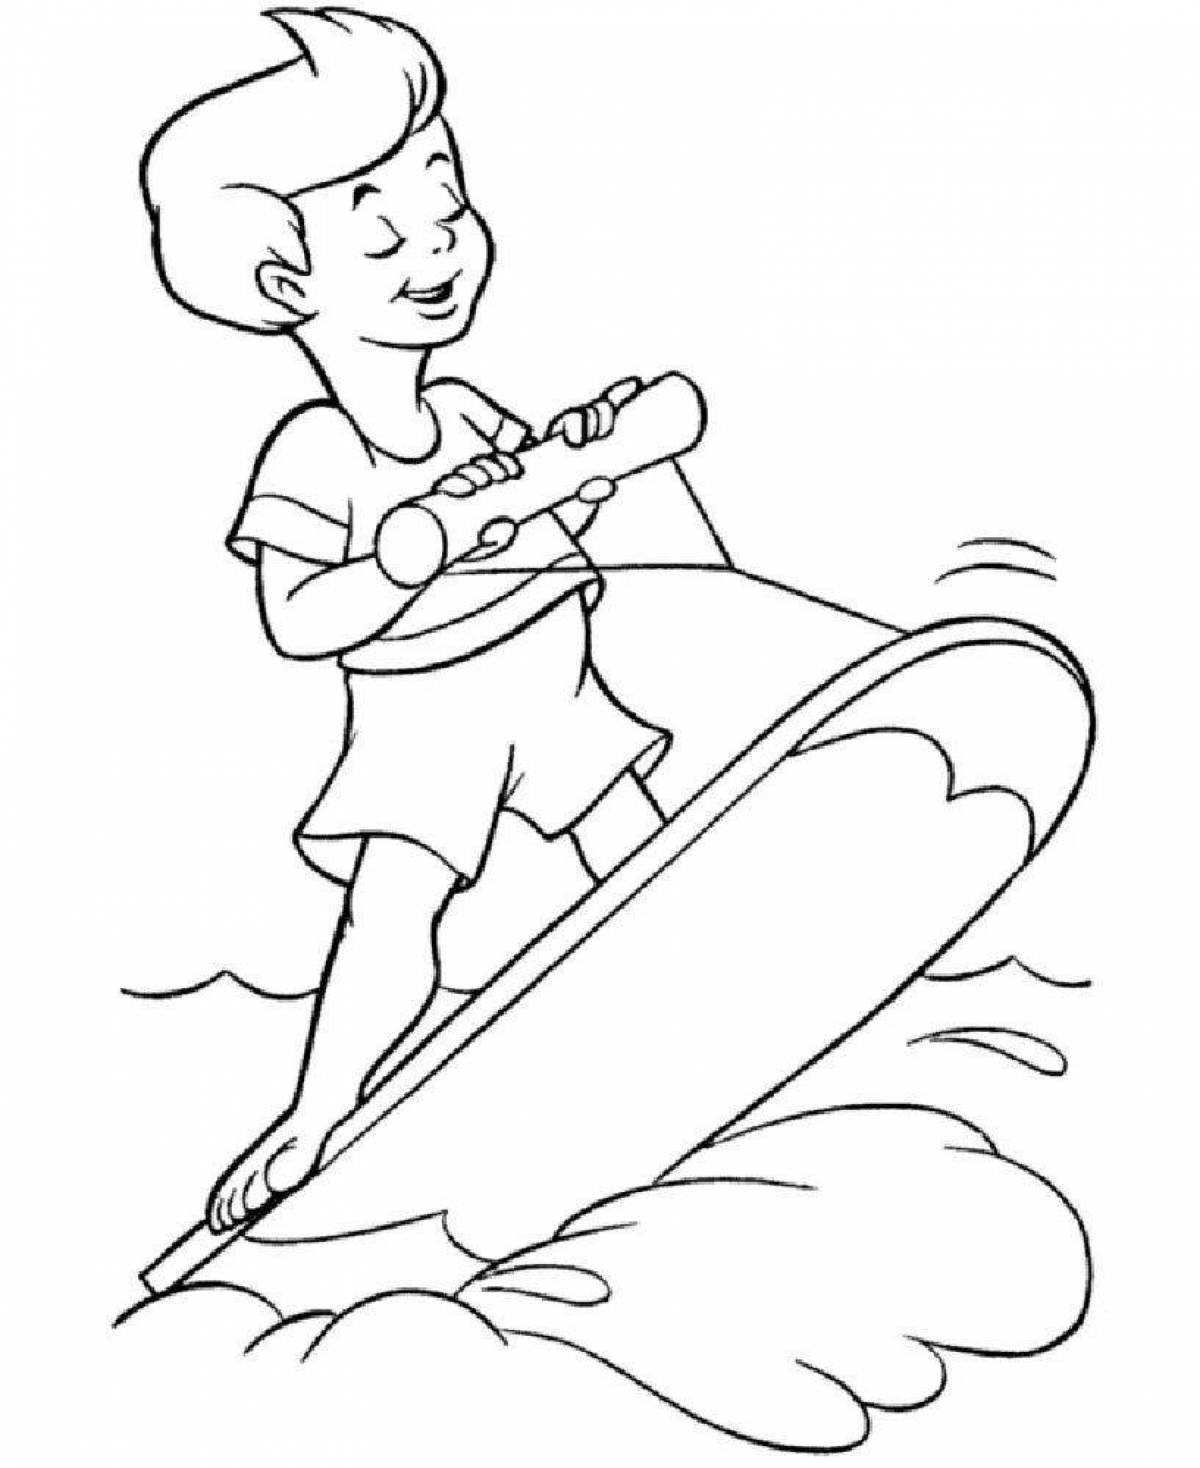 Fabulous surfing coloring page